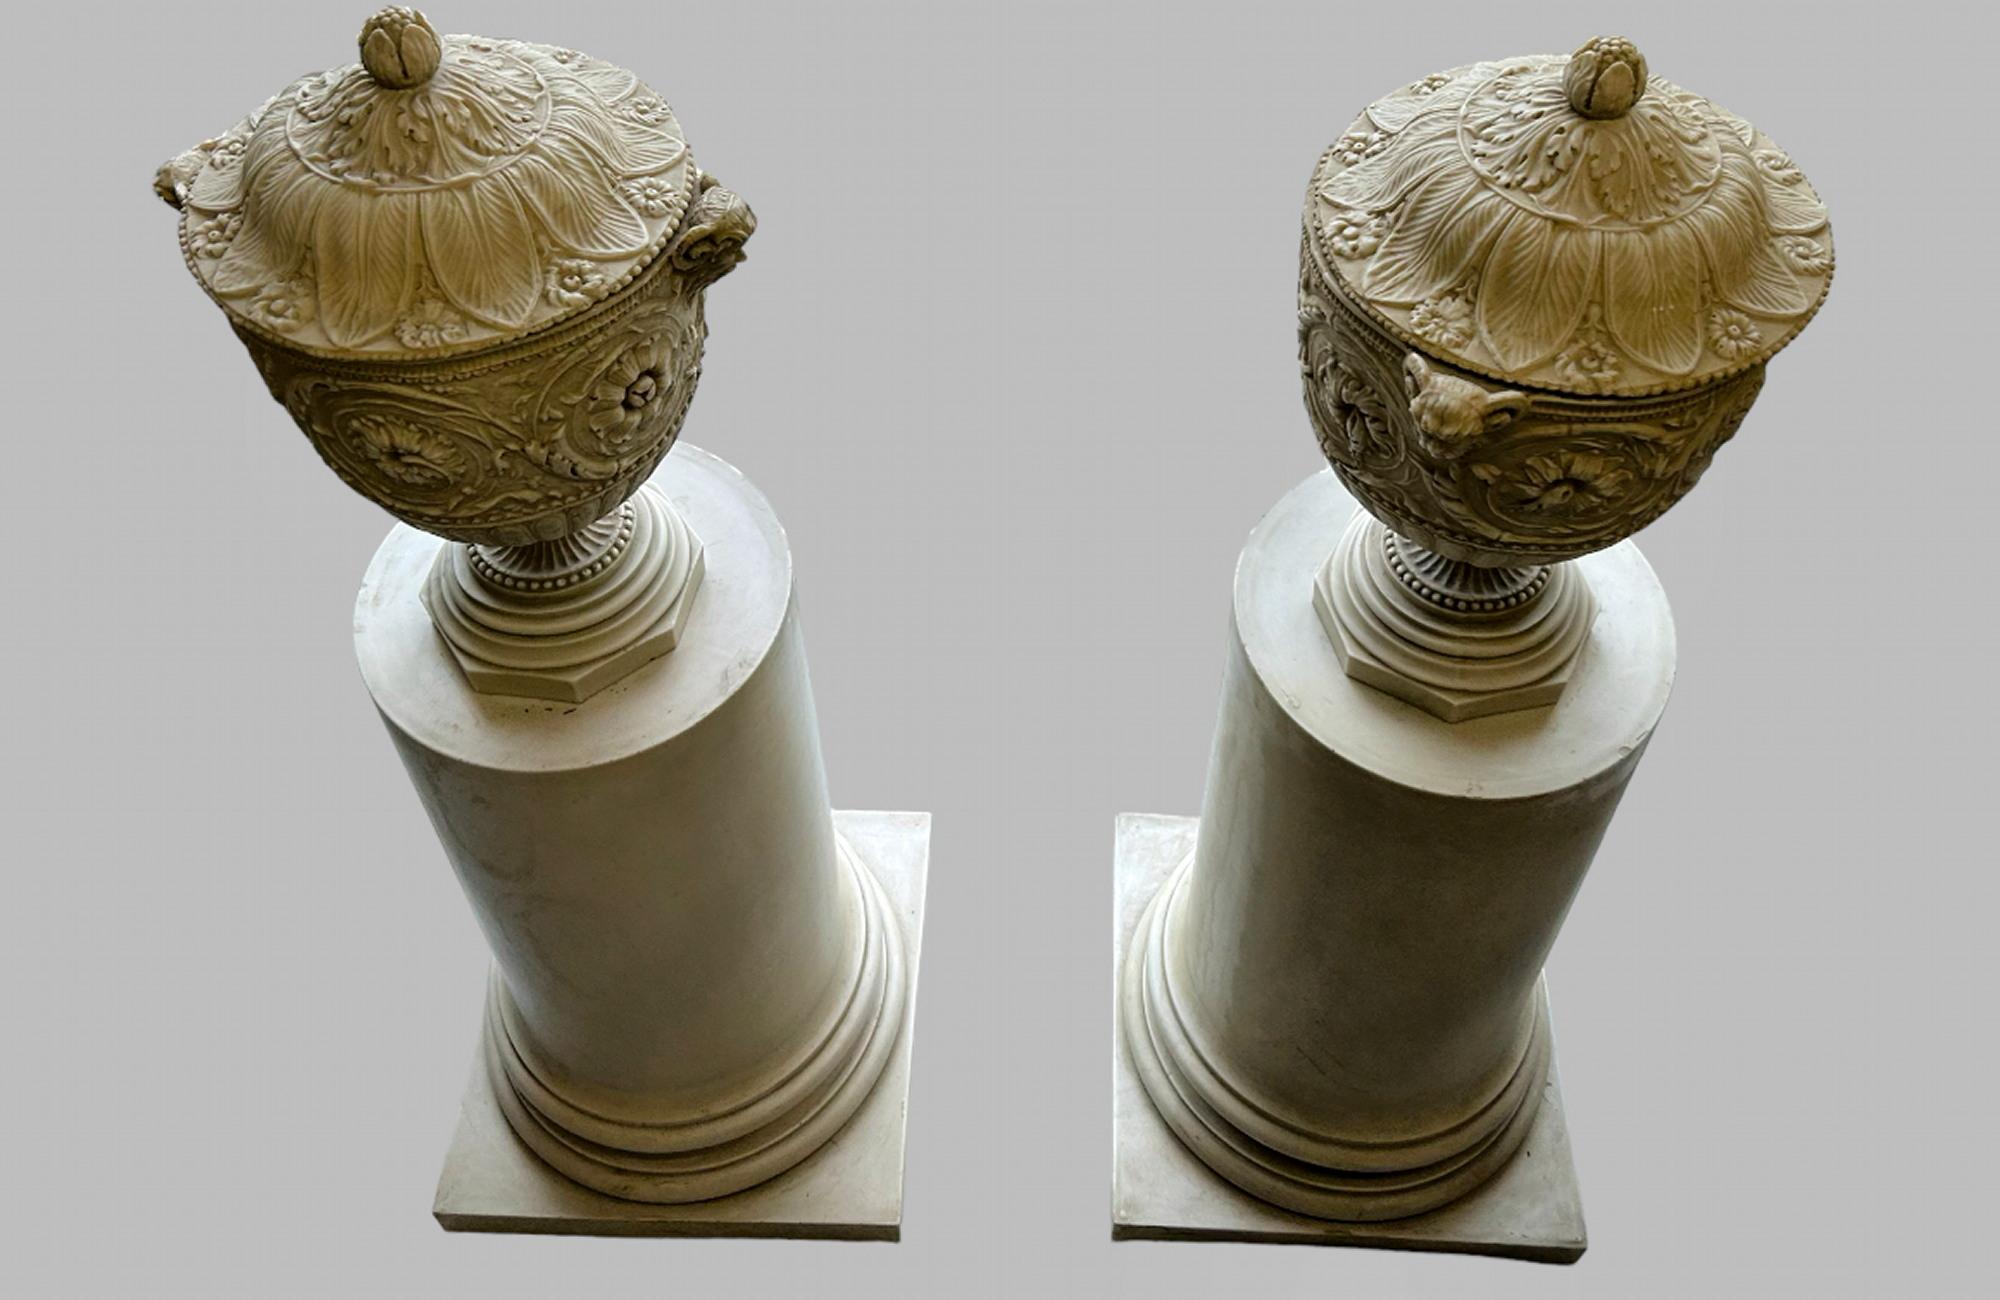 Pair of Highly Decorative Decorative Pedestals, surmounted with lidded urns with satyr masks on composite half column plinths / stands . Urns 46 cm H, total height including stands 118 cm H. Extremely heavy but look fantastic in right setting.